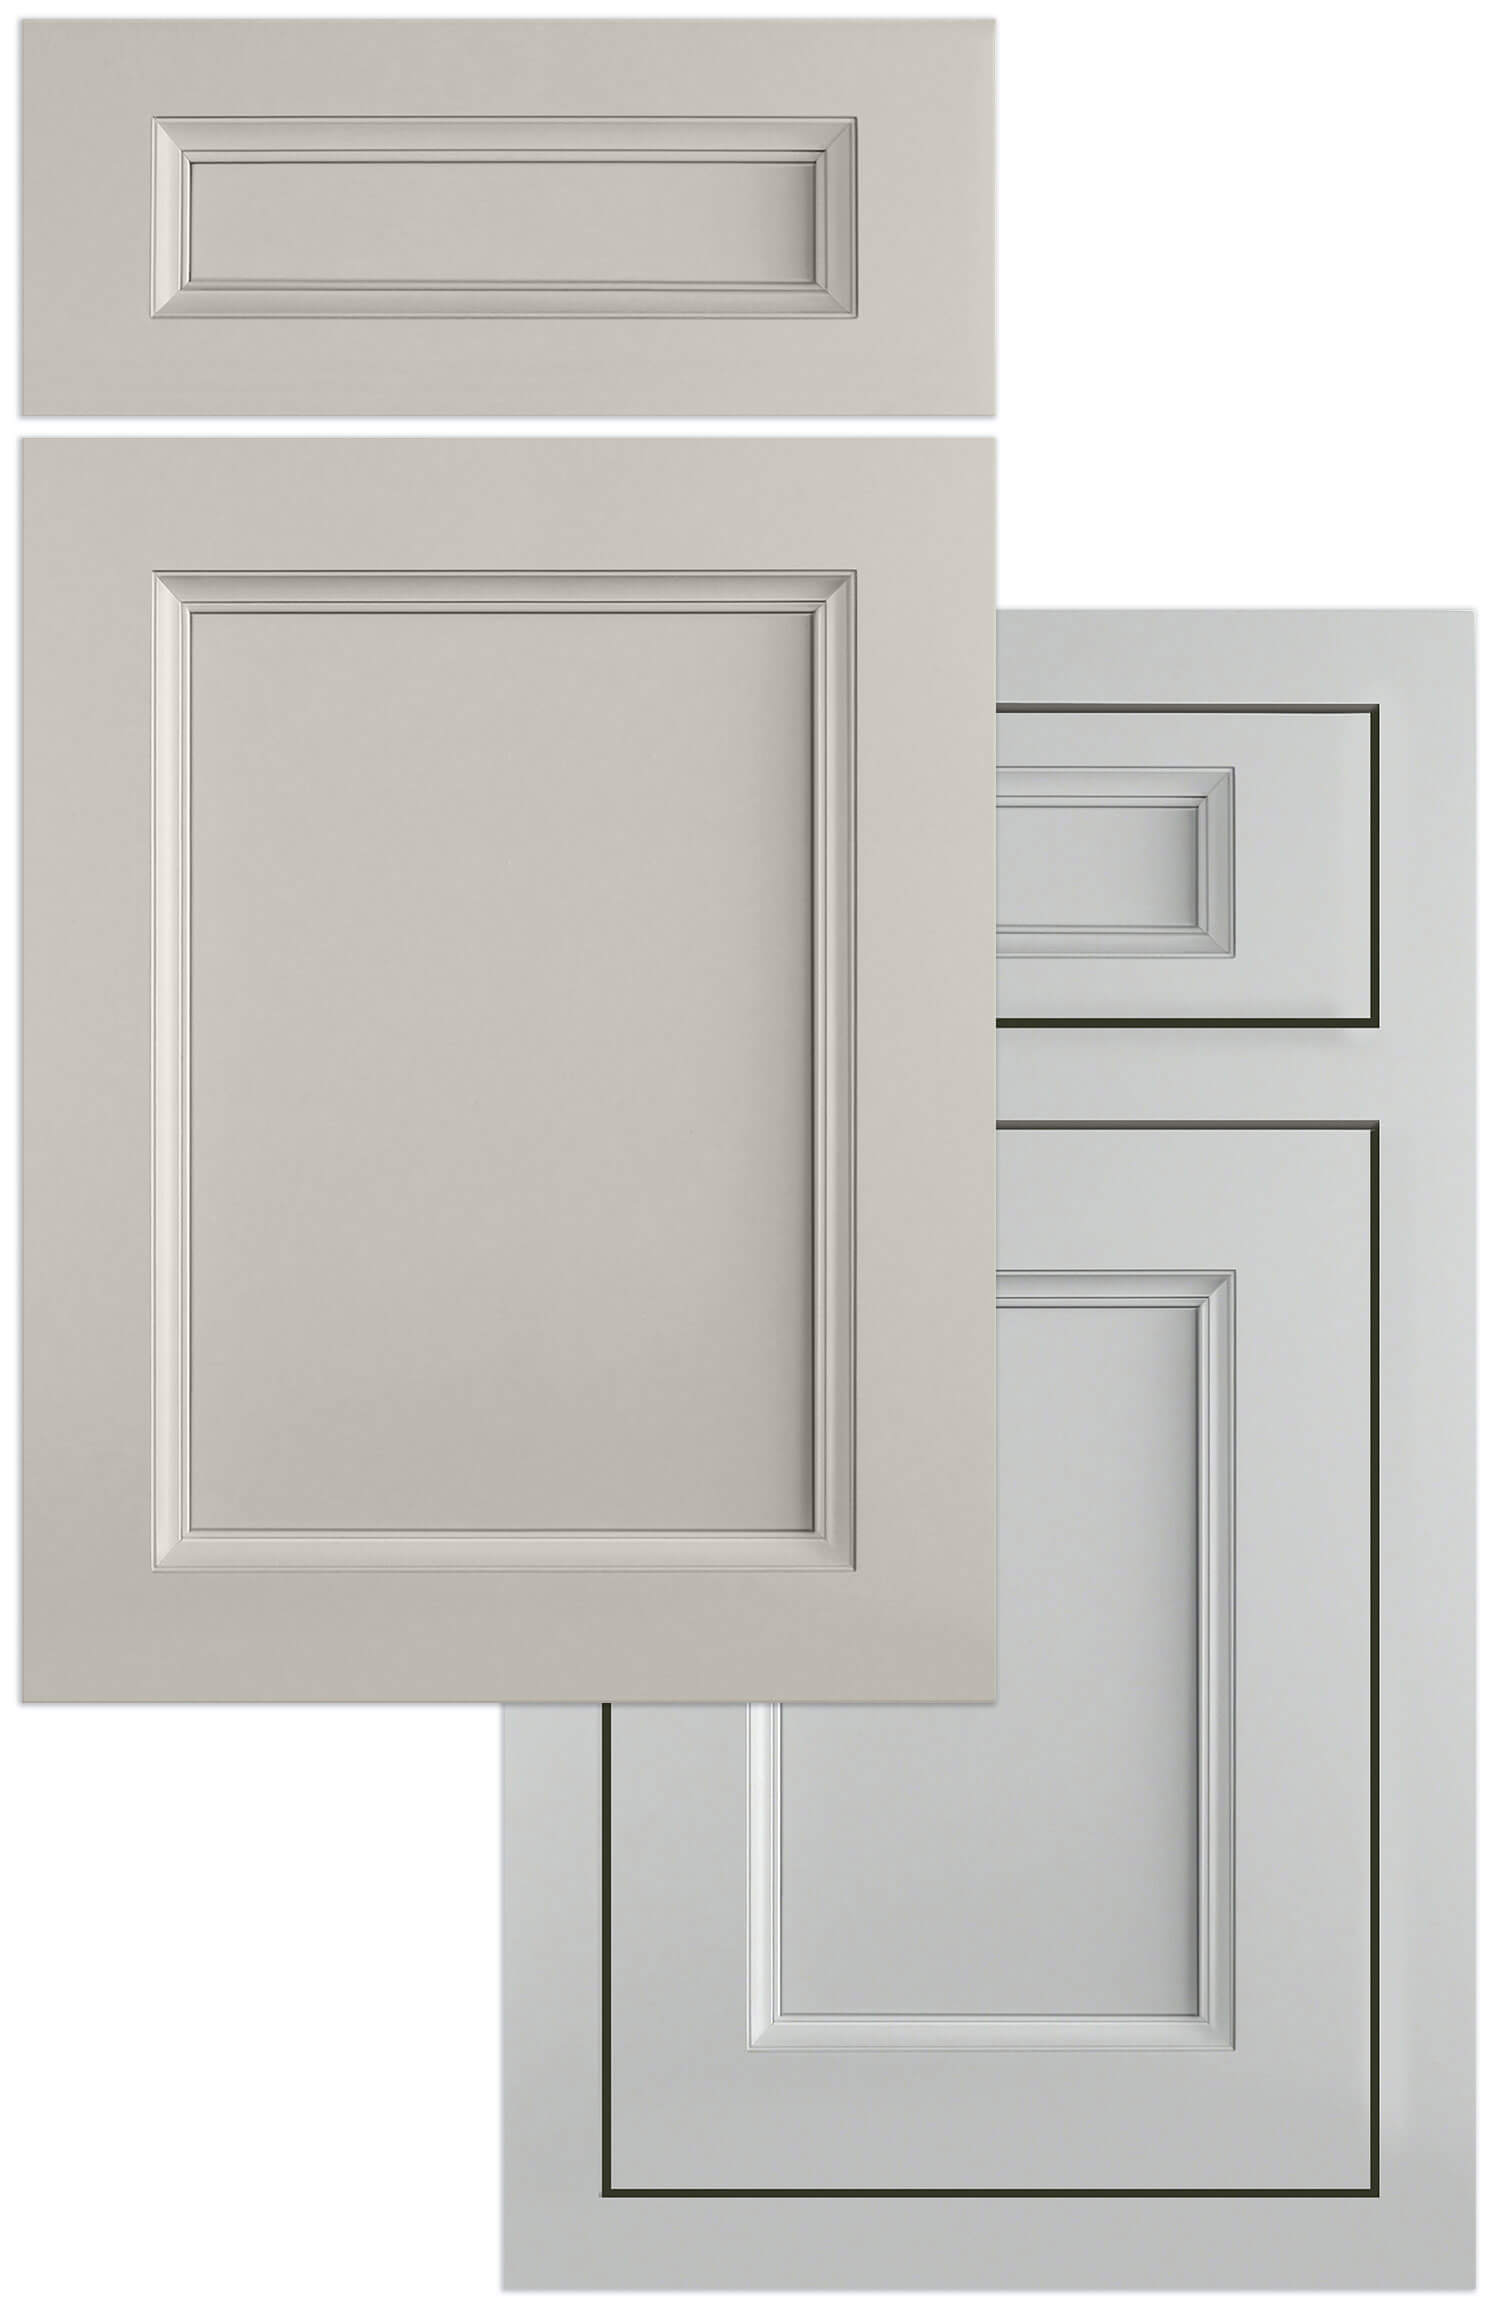 A close up of the full overlay and inset versions of the new flat panel cabinet door style.